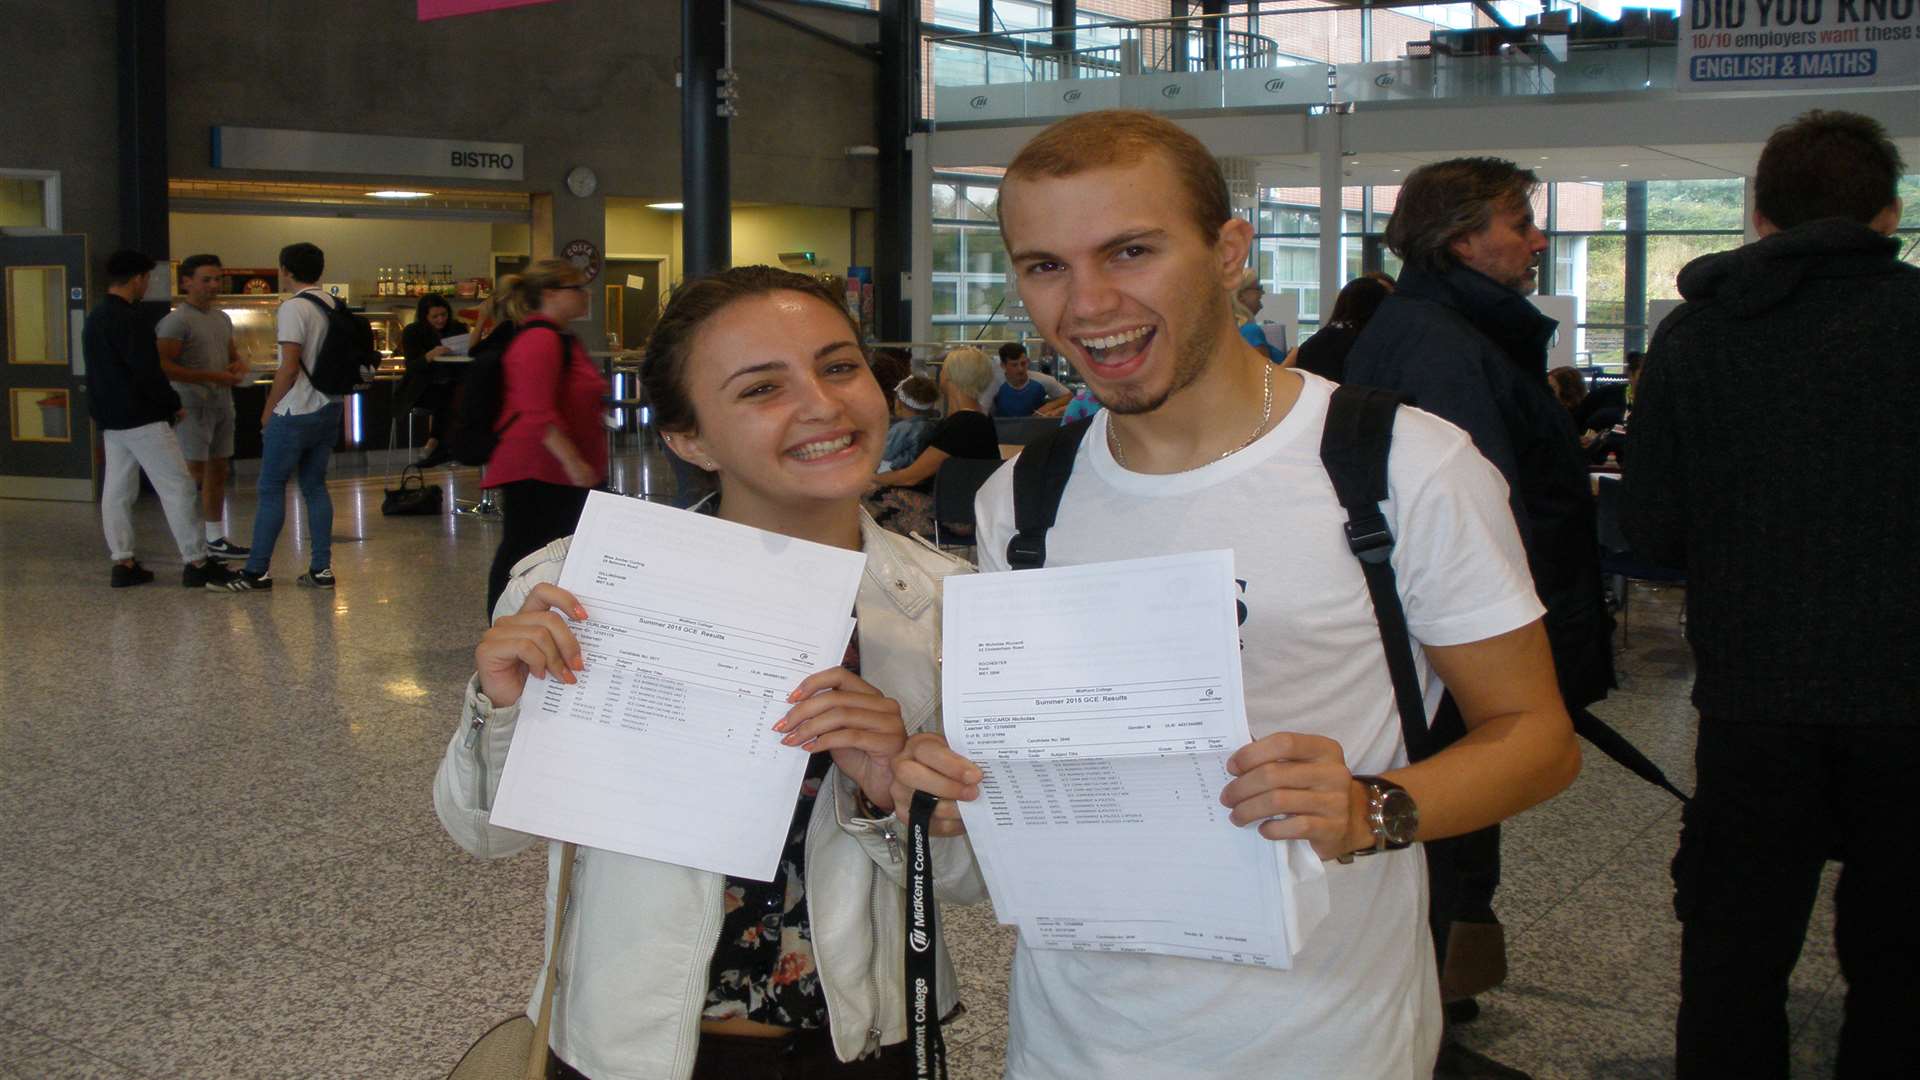 A-level students Amber Curling and Nicholas Riccardi from Mid Kent College